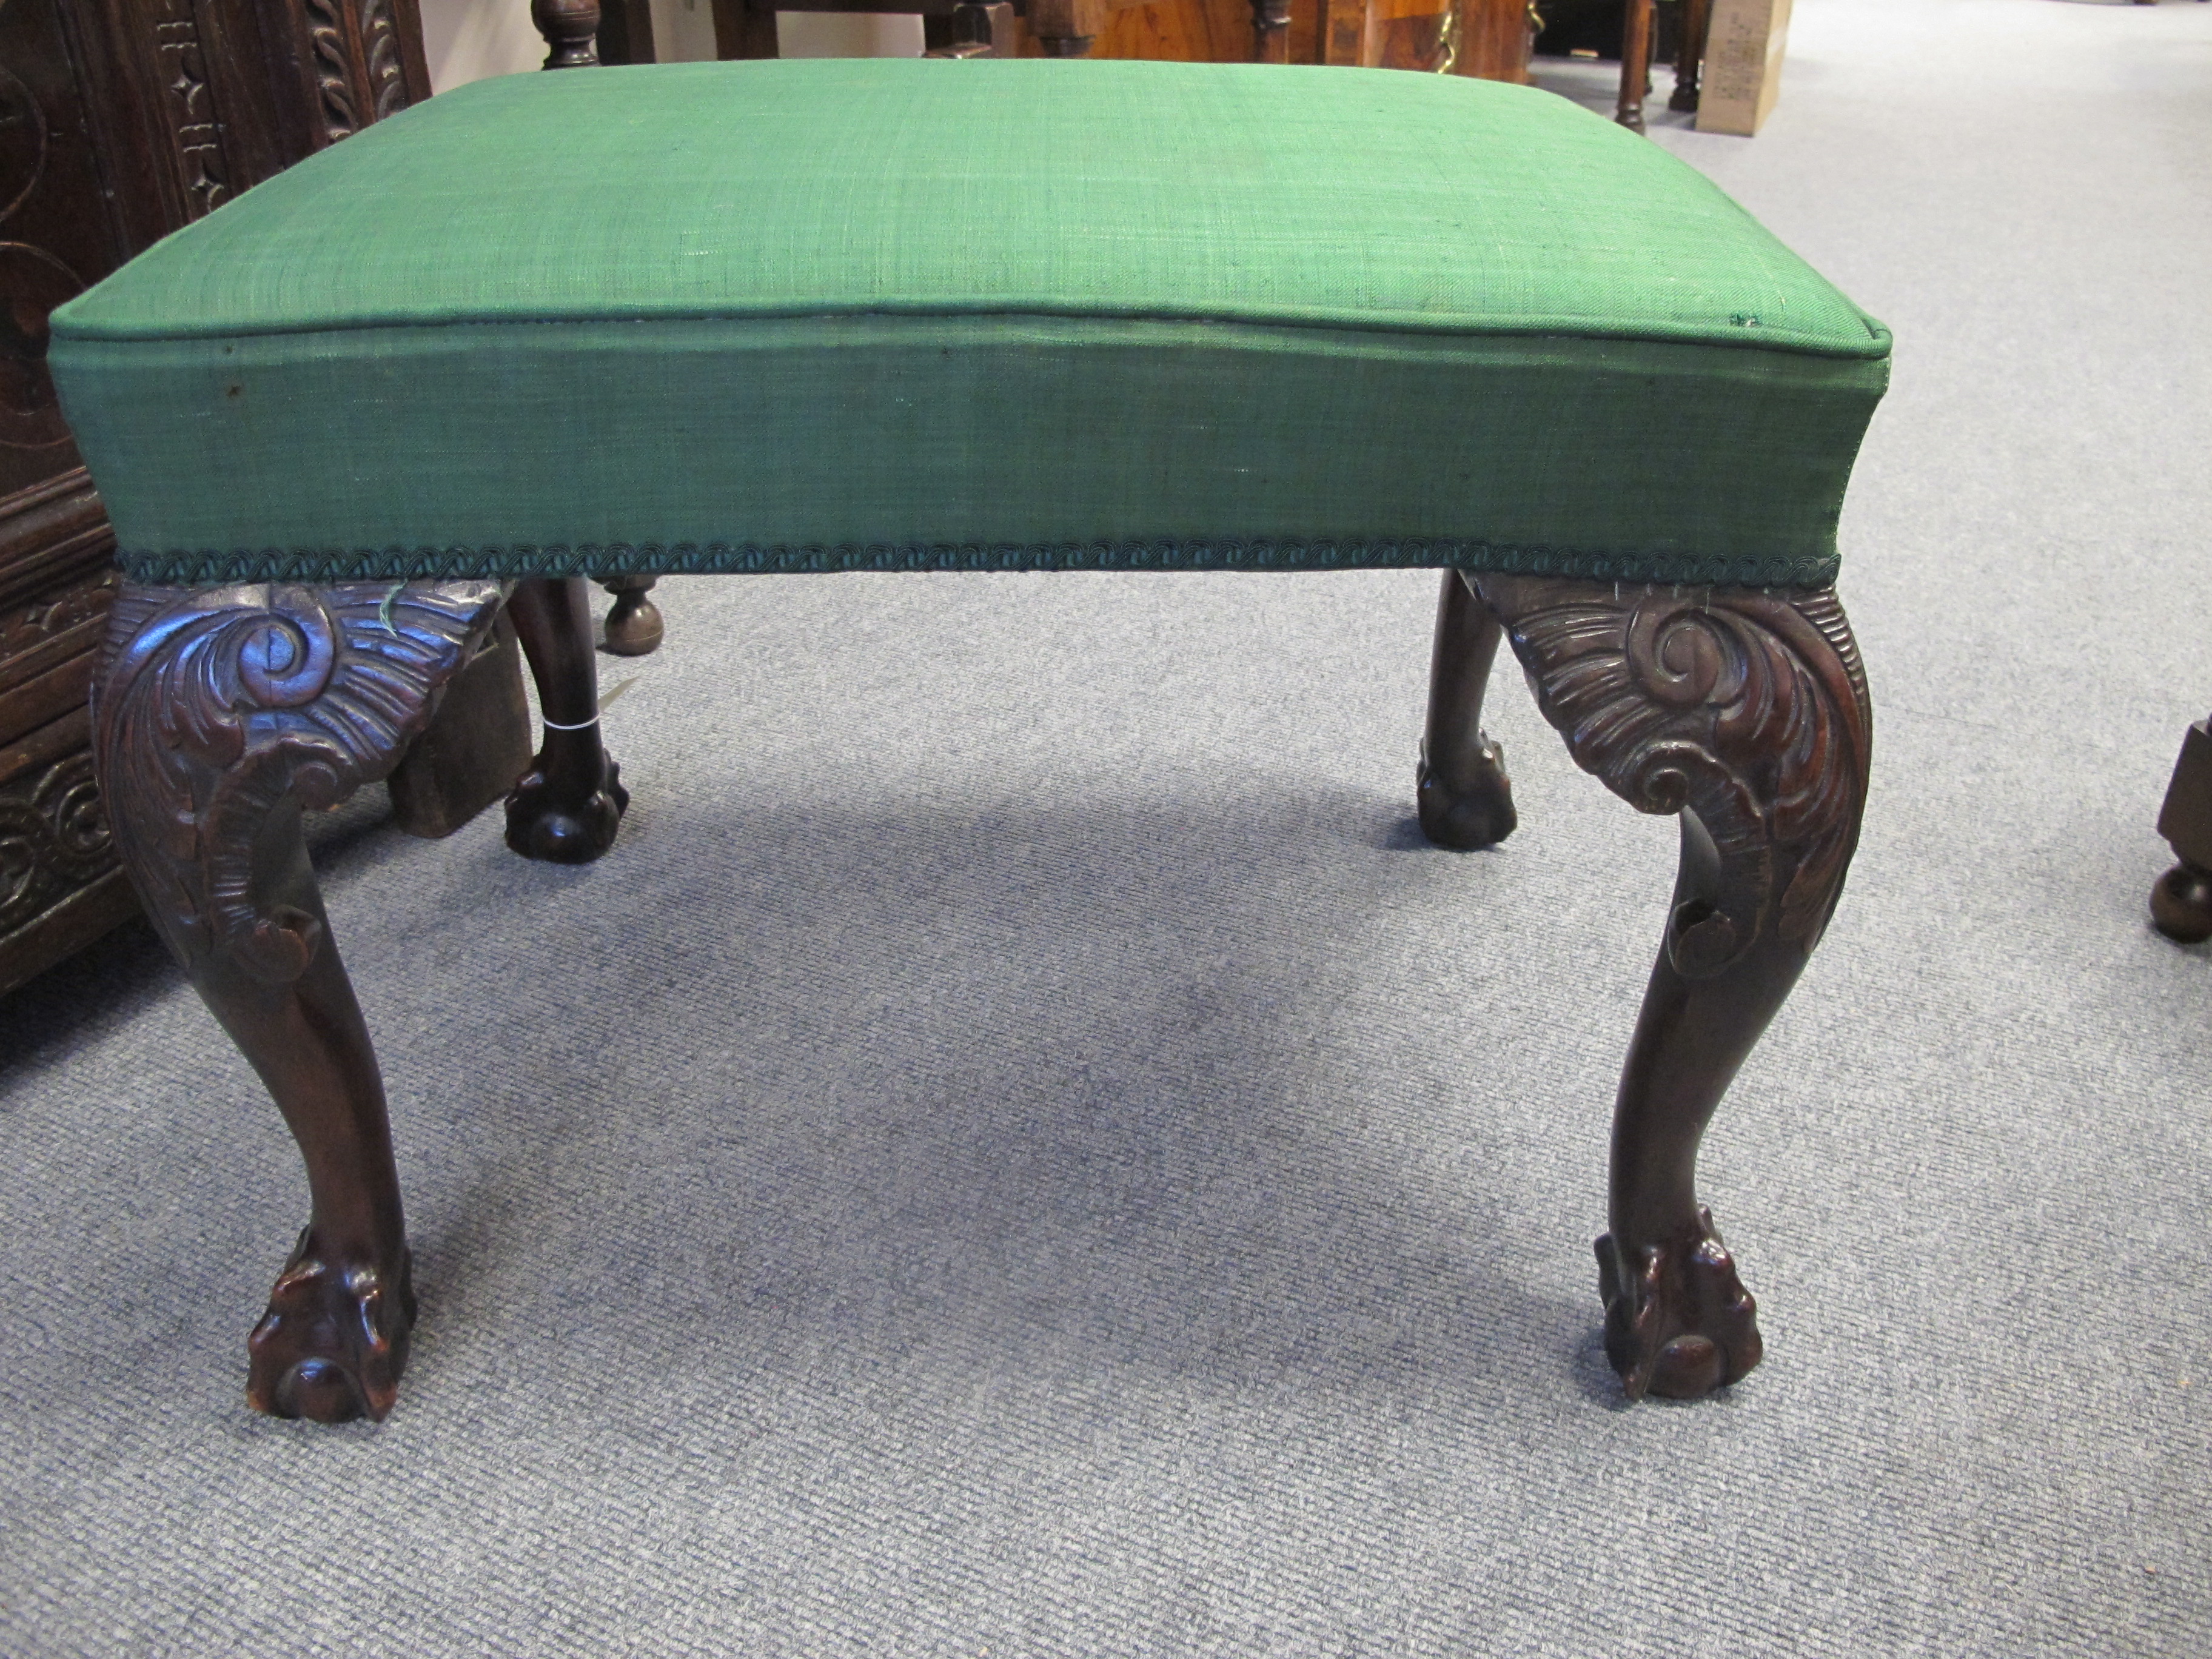 A GEORGE II IRISH WALNUT STOOL C.1740 the padded seat covered with green fabric, on cabriole legs - Image 5 of 14